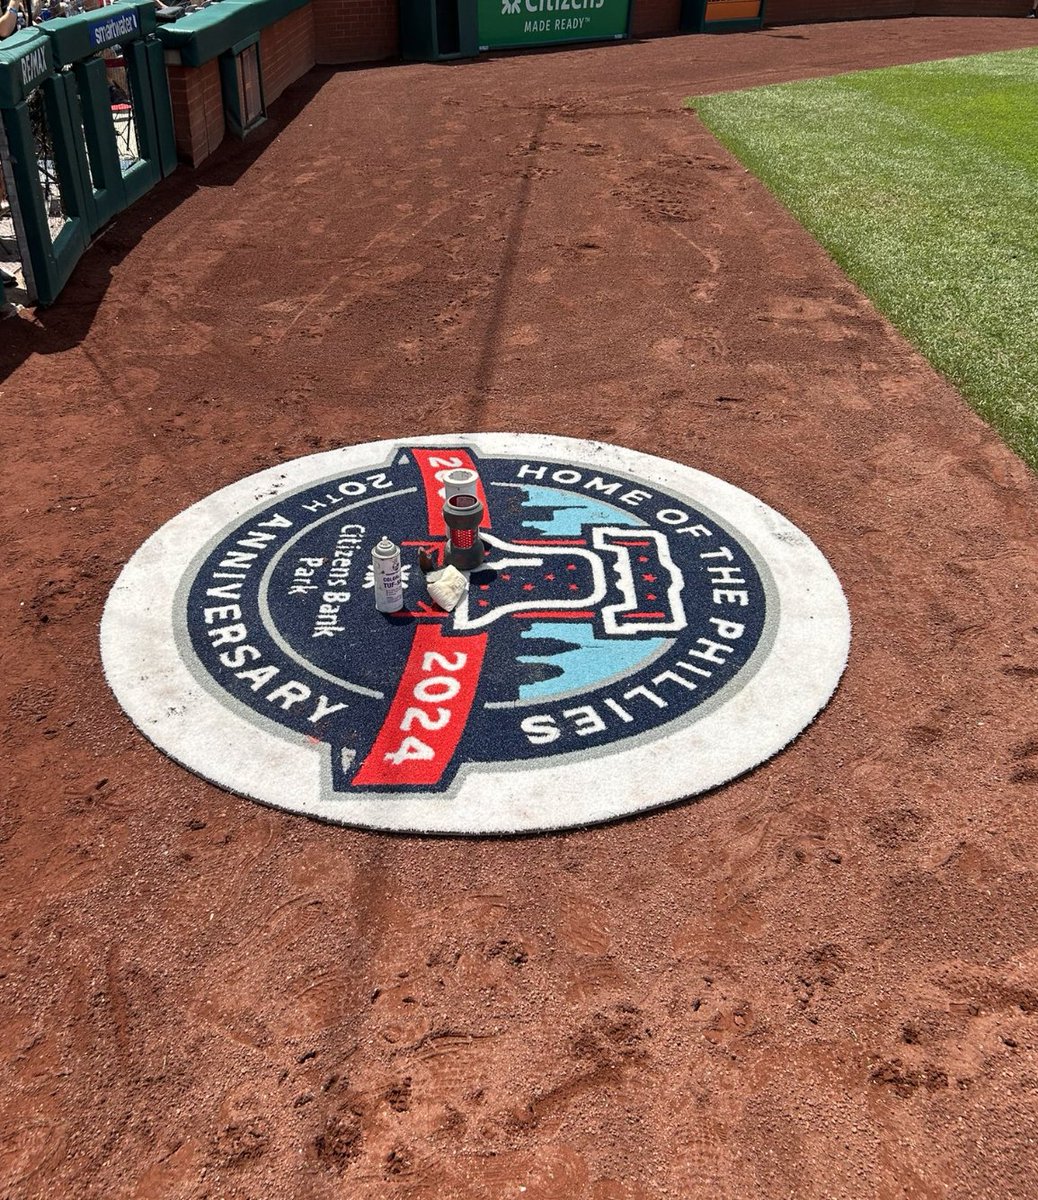 The Phillies have a new Citizens Bank Park 20th anniversary on-deck circle.